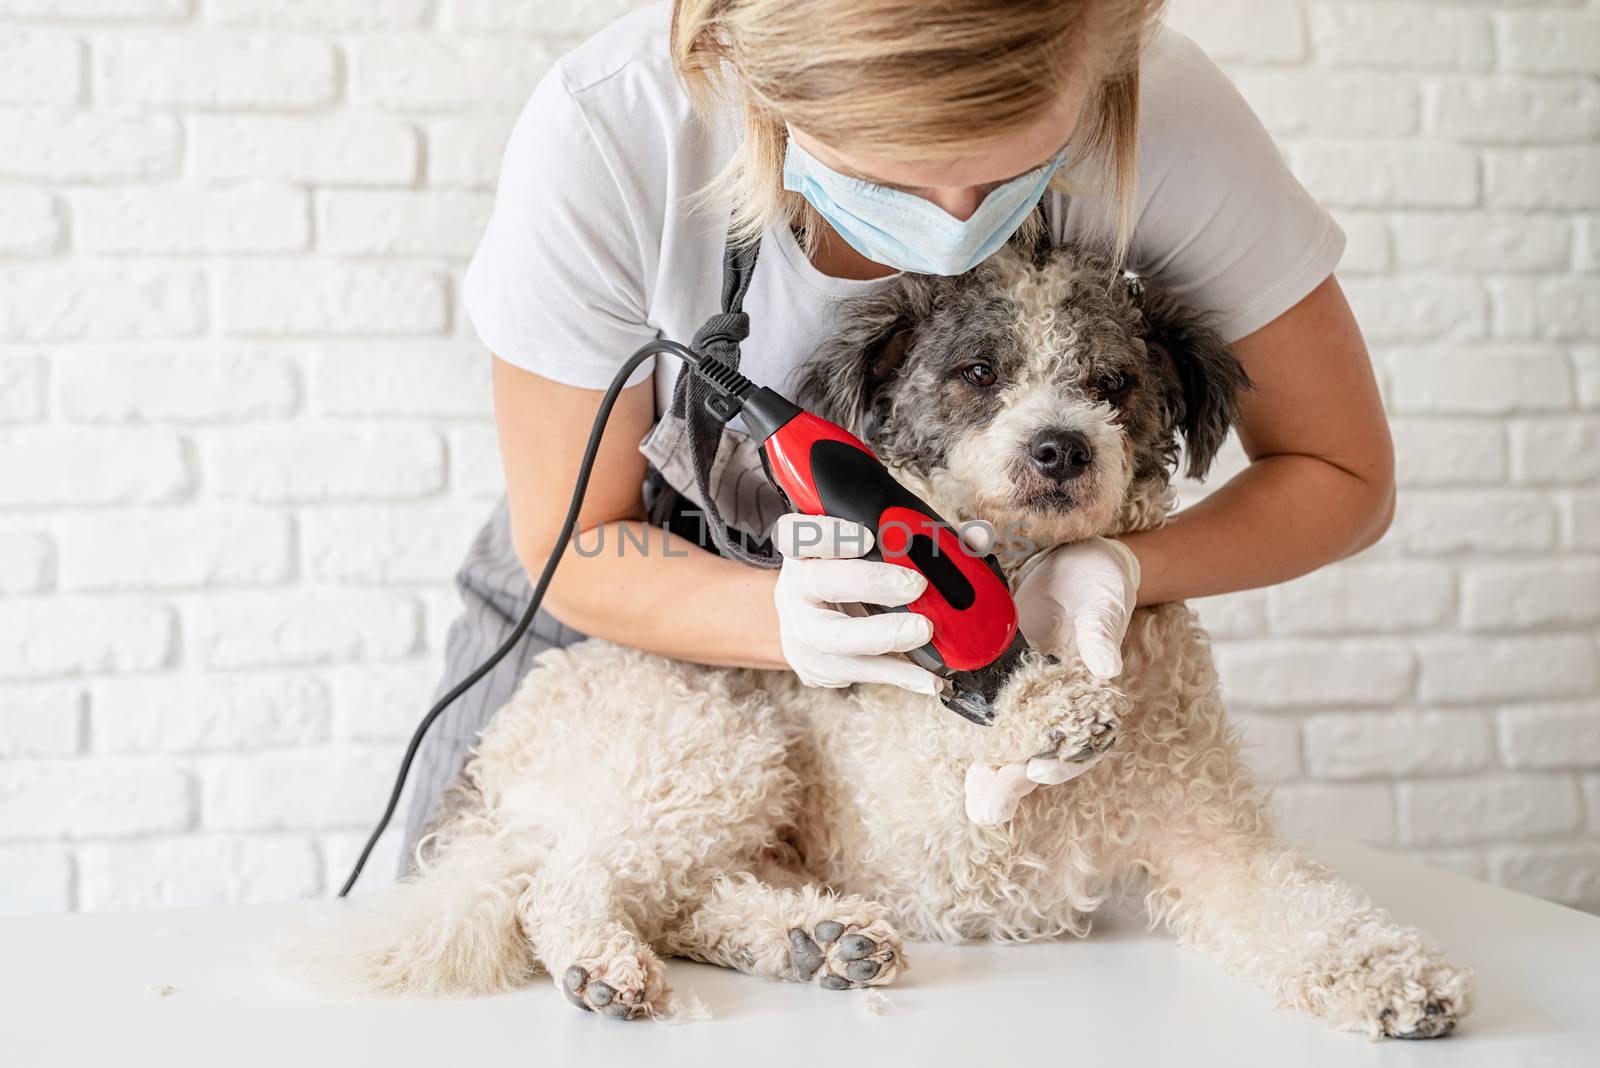 Blond woman in a mask and gloves grooming a dog with a trimmer at home by Desperada